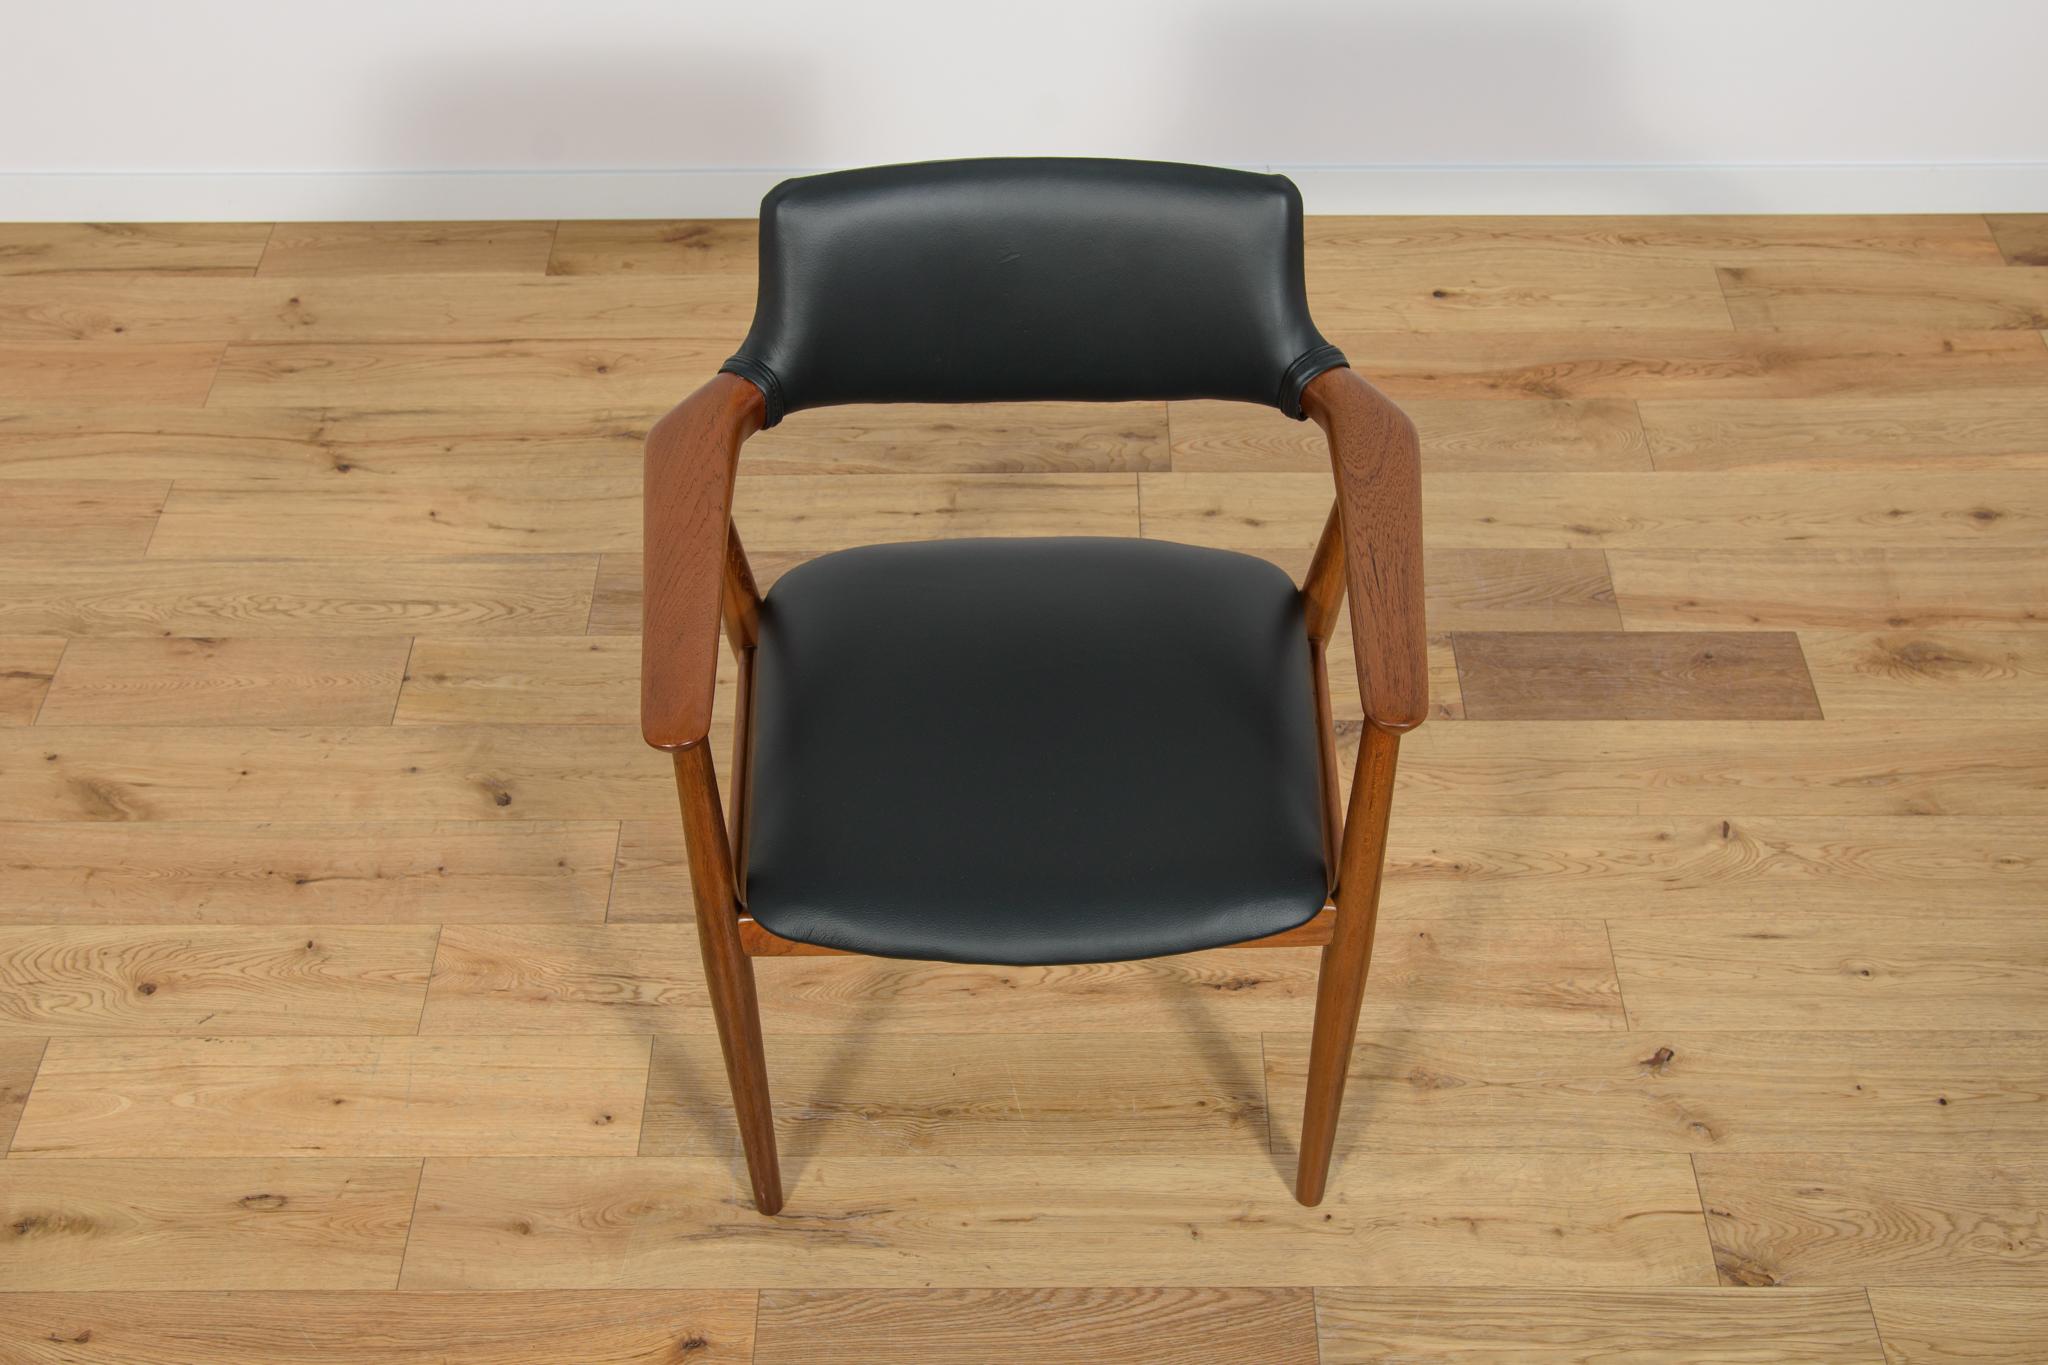 Leather Mid century Teak Dining Chairs Model GM11 by Svend Åge Eriksen for Glostrup. For Sale